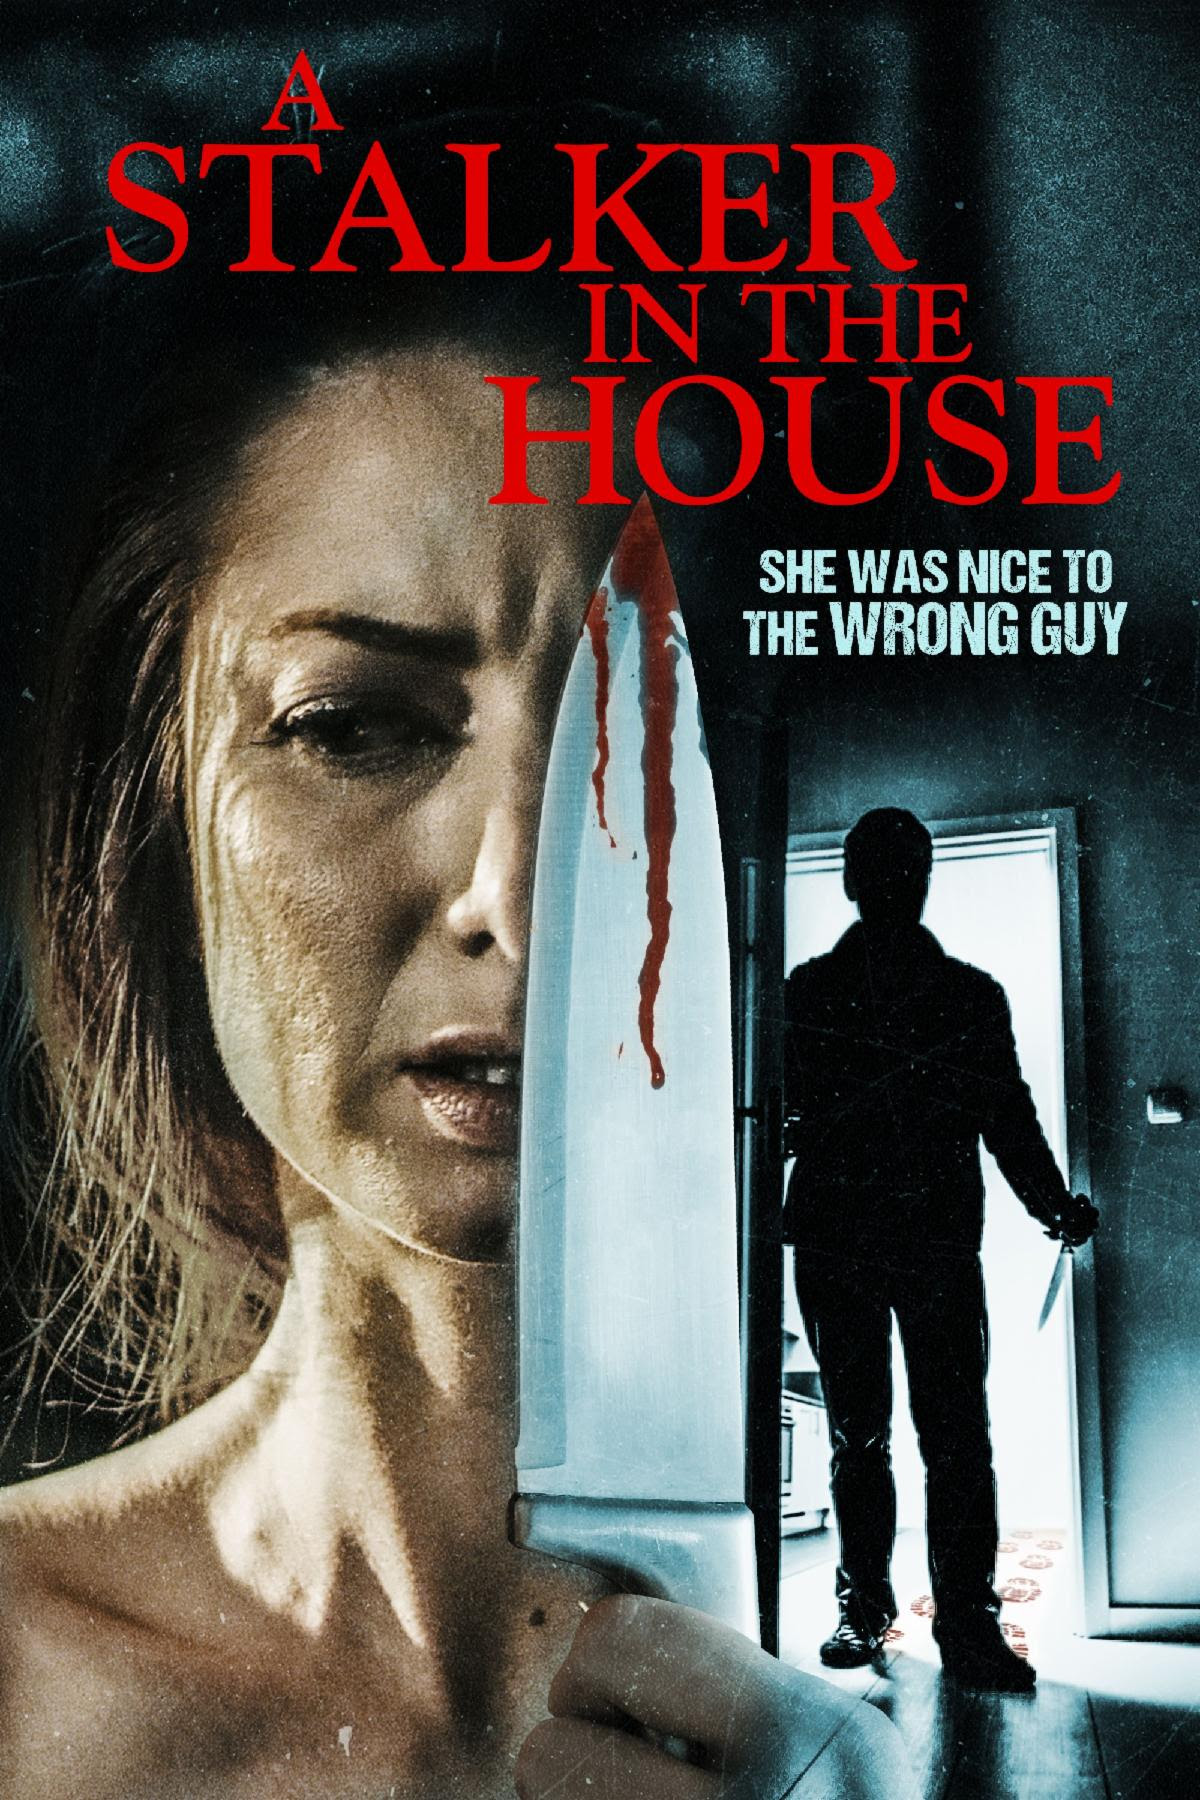 A Stalker in the House – Movie Review